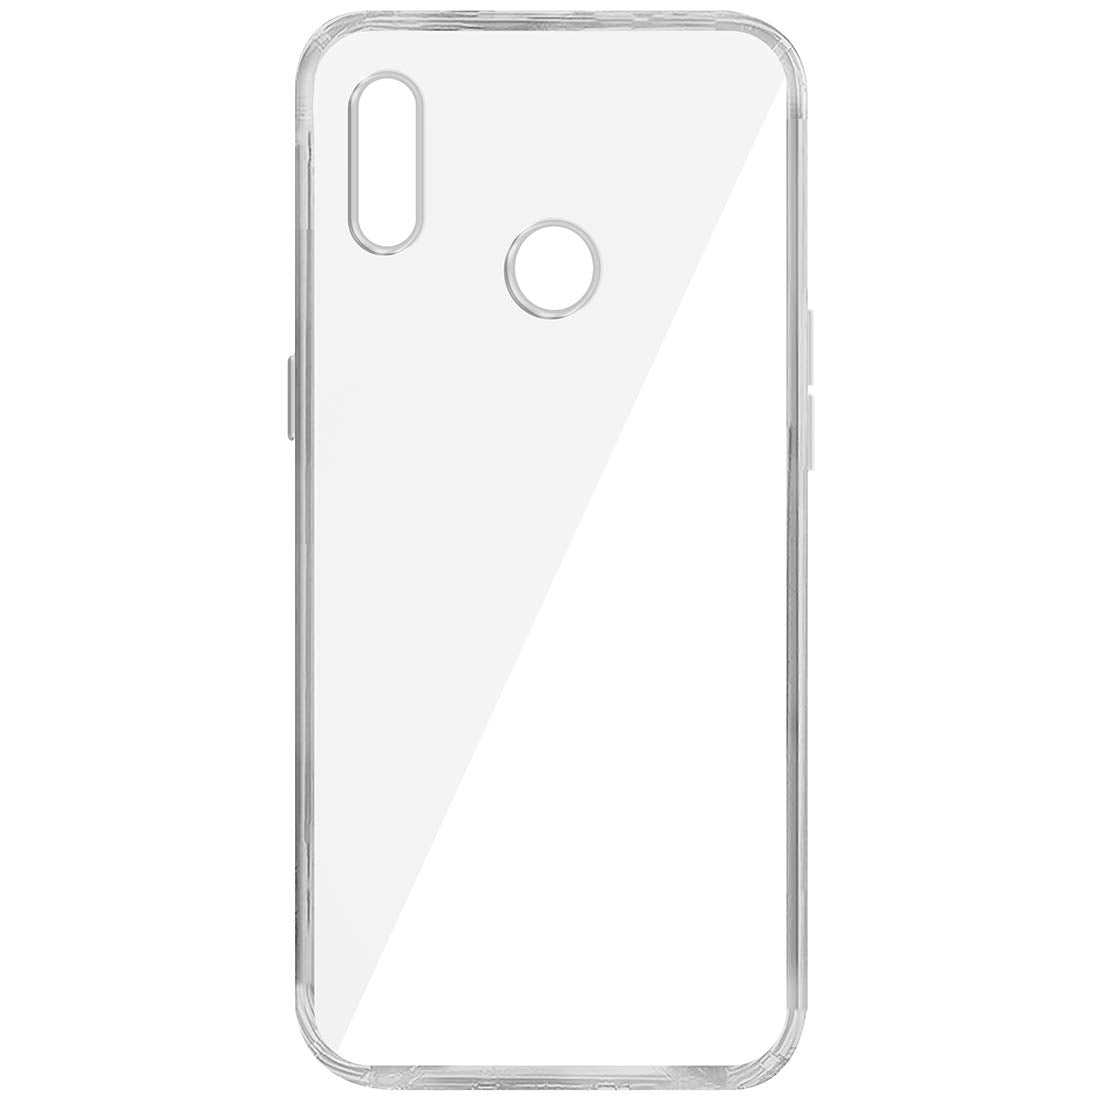 Buy Realme 3 Mobile Back Covers